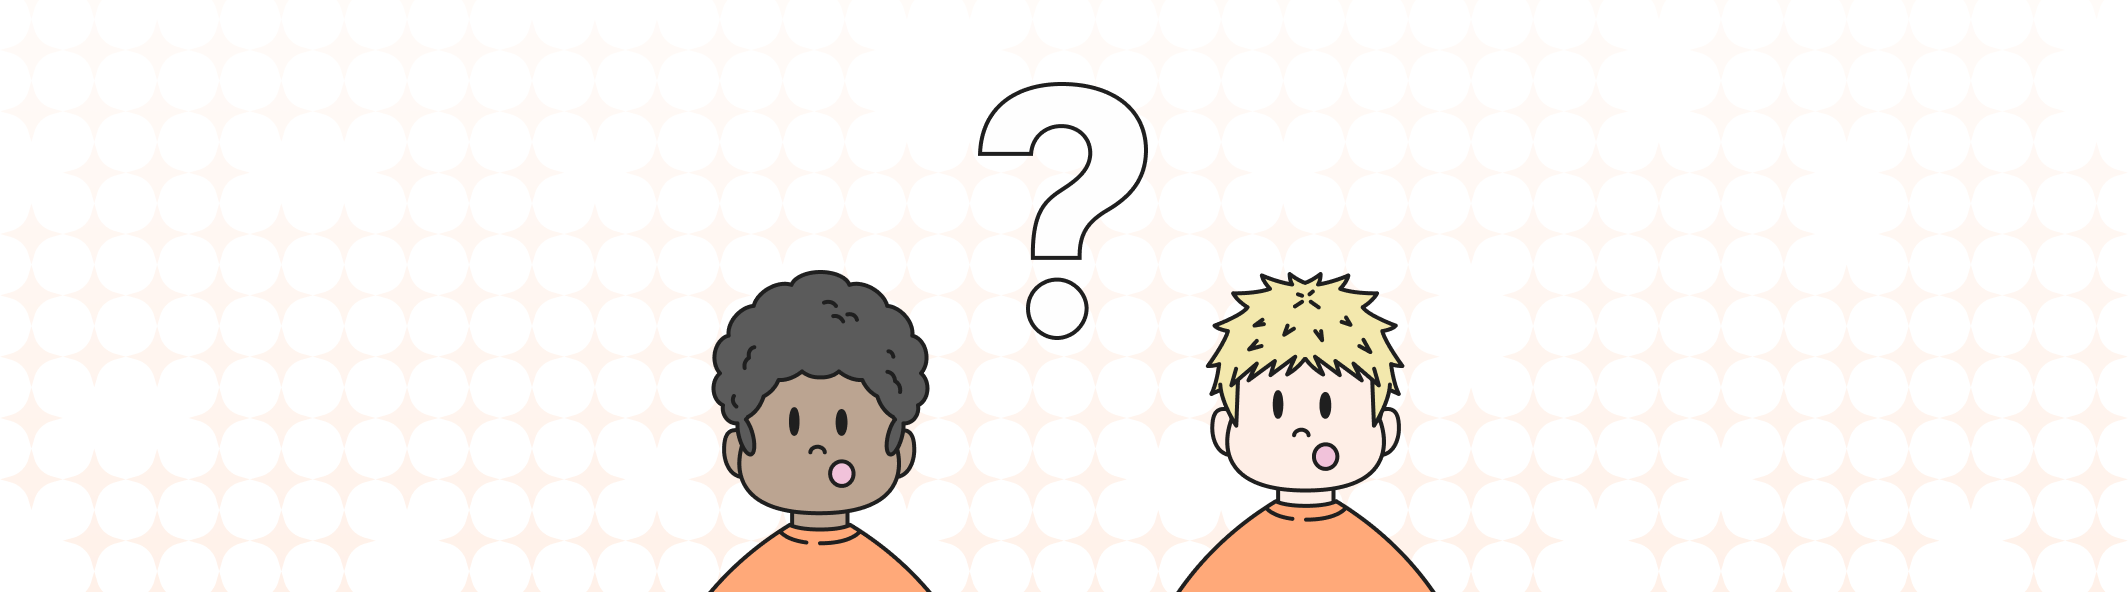 A line illustration of two people with their mouth open, and a giant question mark between them.